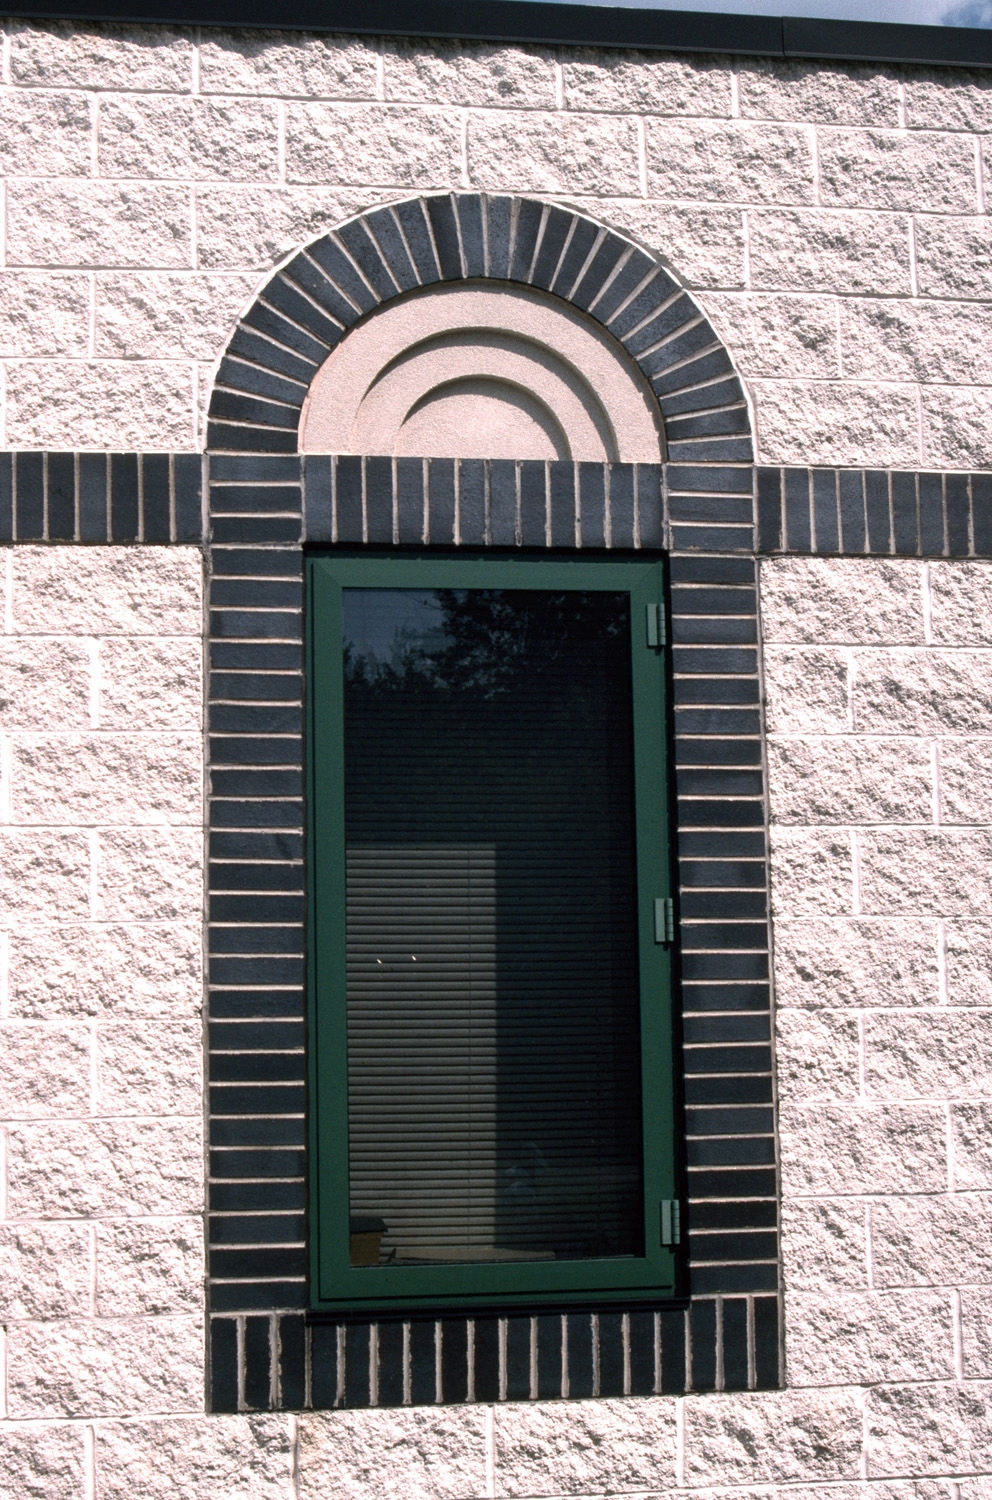 Exterior, detail of a window with colored-brick banding